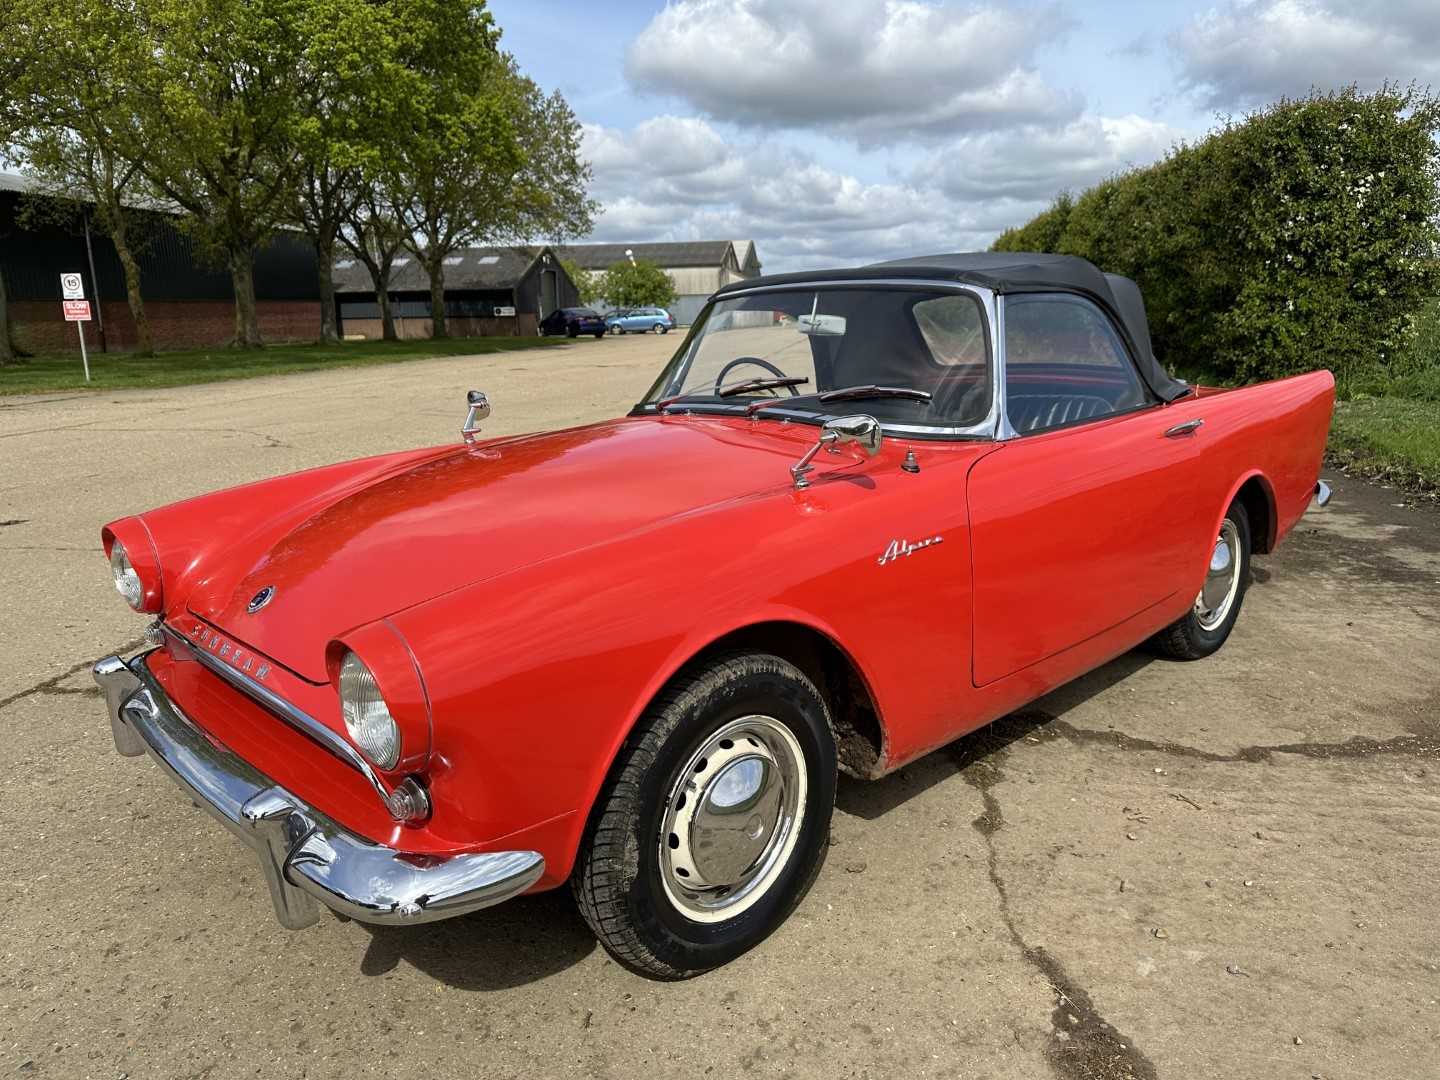 1960 Sunbeam Alpine sports convertible, 1600cc engine, manual gearbox with overdrive, reg. no. 3685 - Image 4 of 30